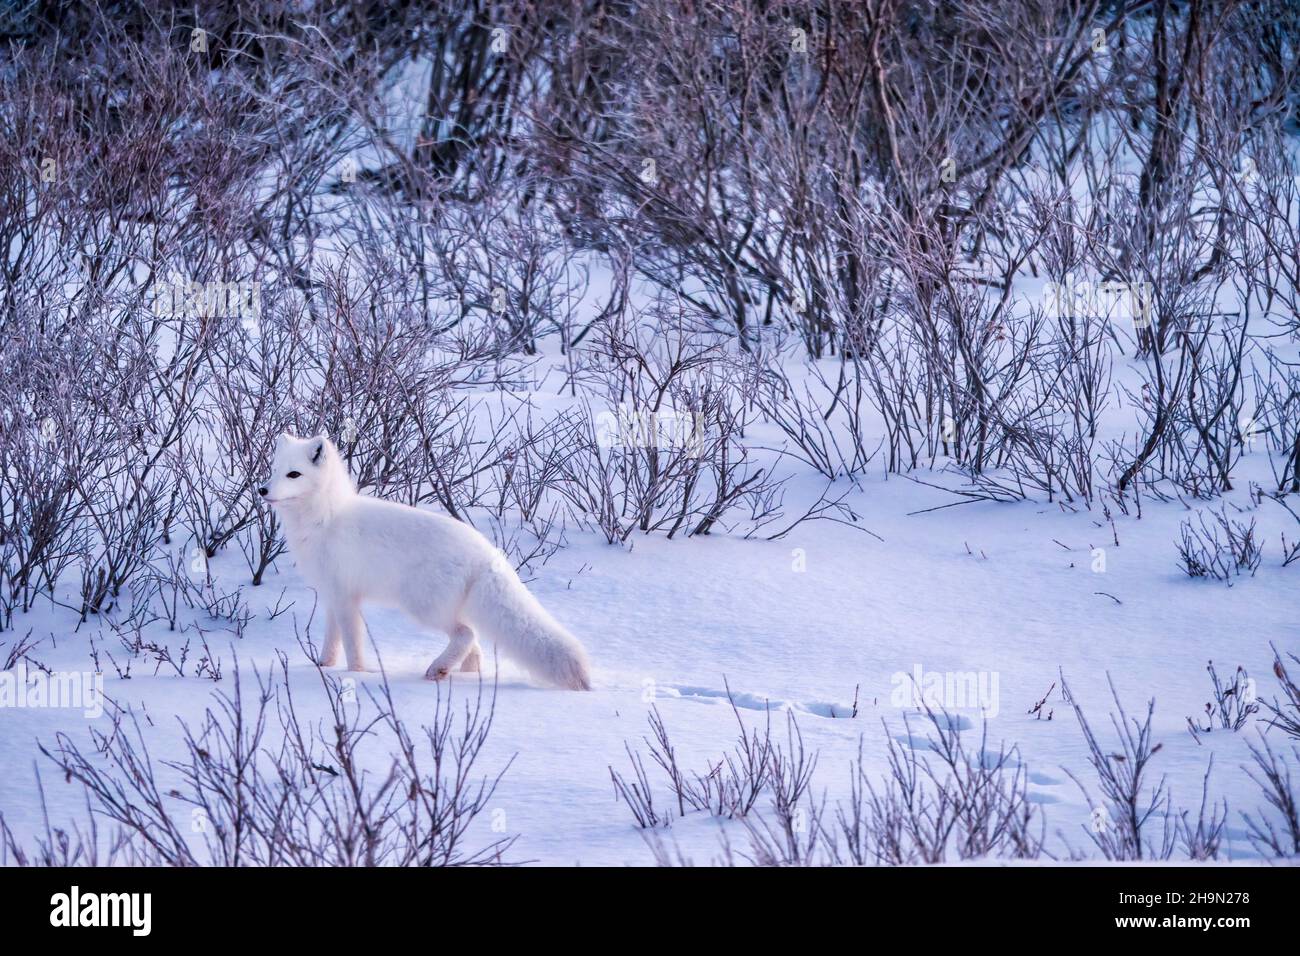 A beautiful Arctic fox (Vulpes lagopus) standing in fresh snow near its den, surrounded by bare willow bushes, near Churchill, Manitoba, Canada. Stock Photo